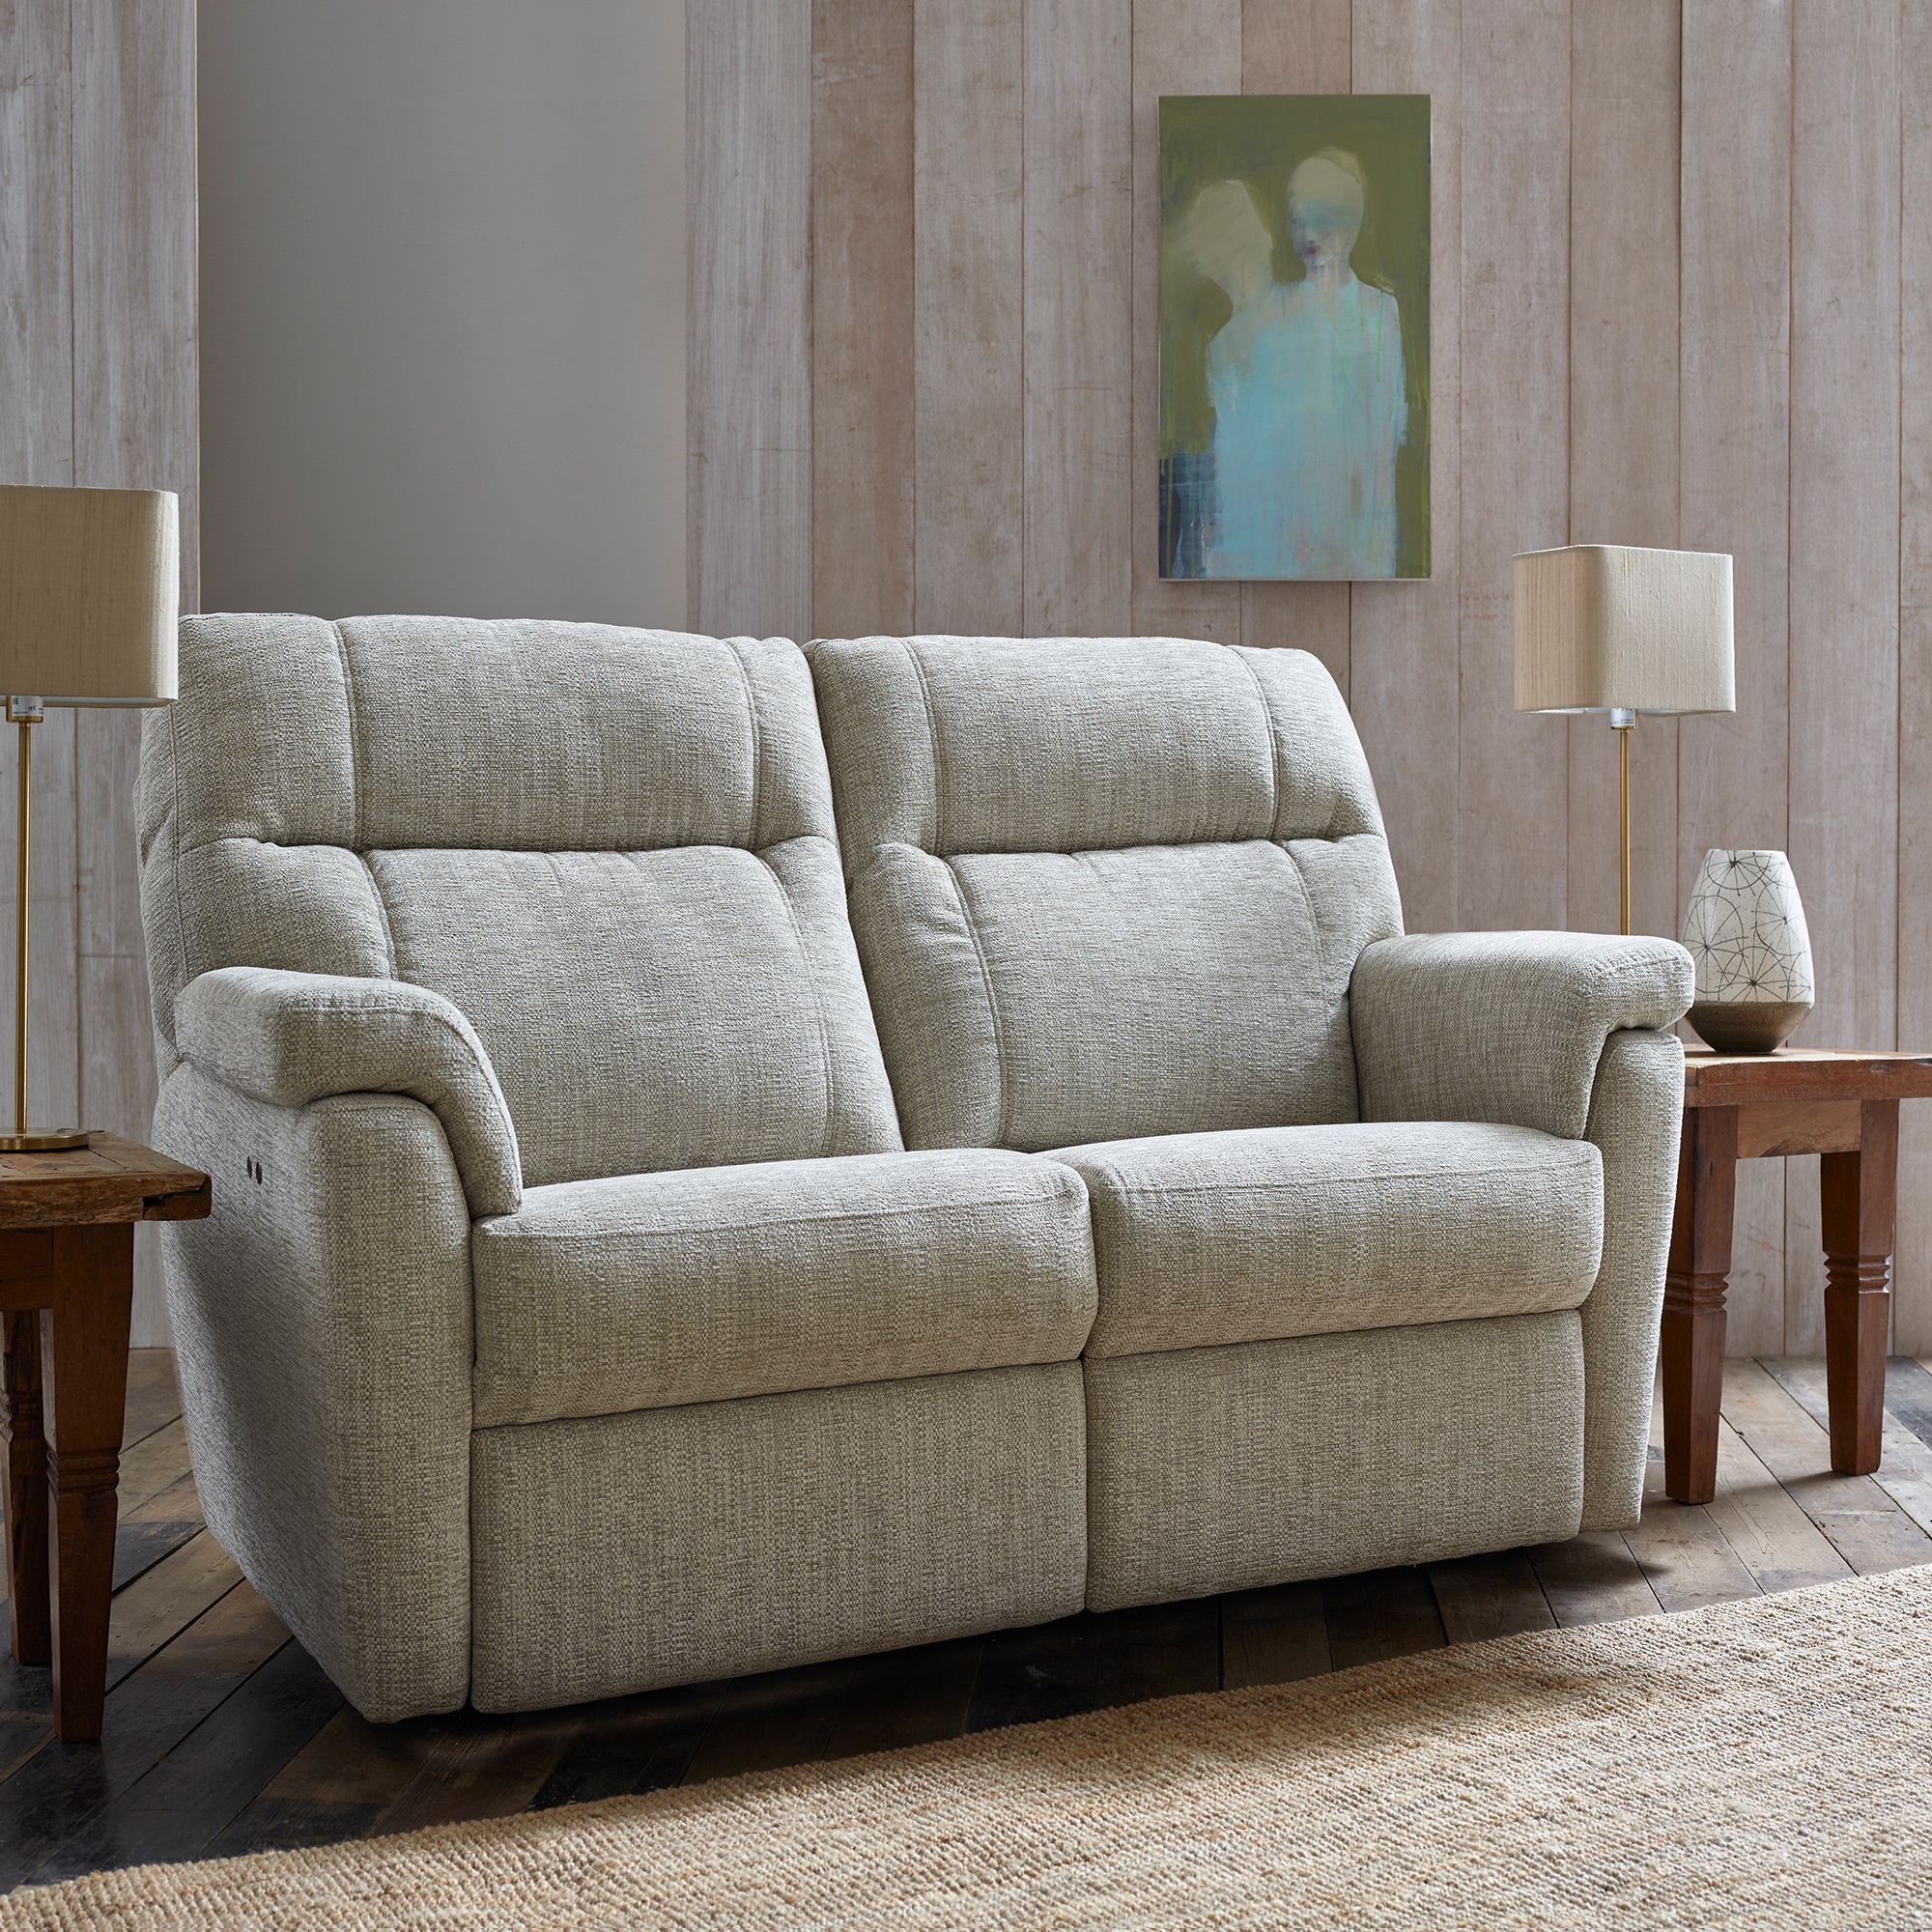 Cookes Collection Lepus 2 Seater Recliner Sofa | All Sofas | Cookes ...